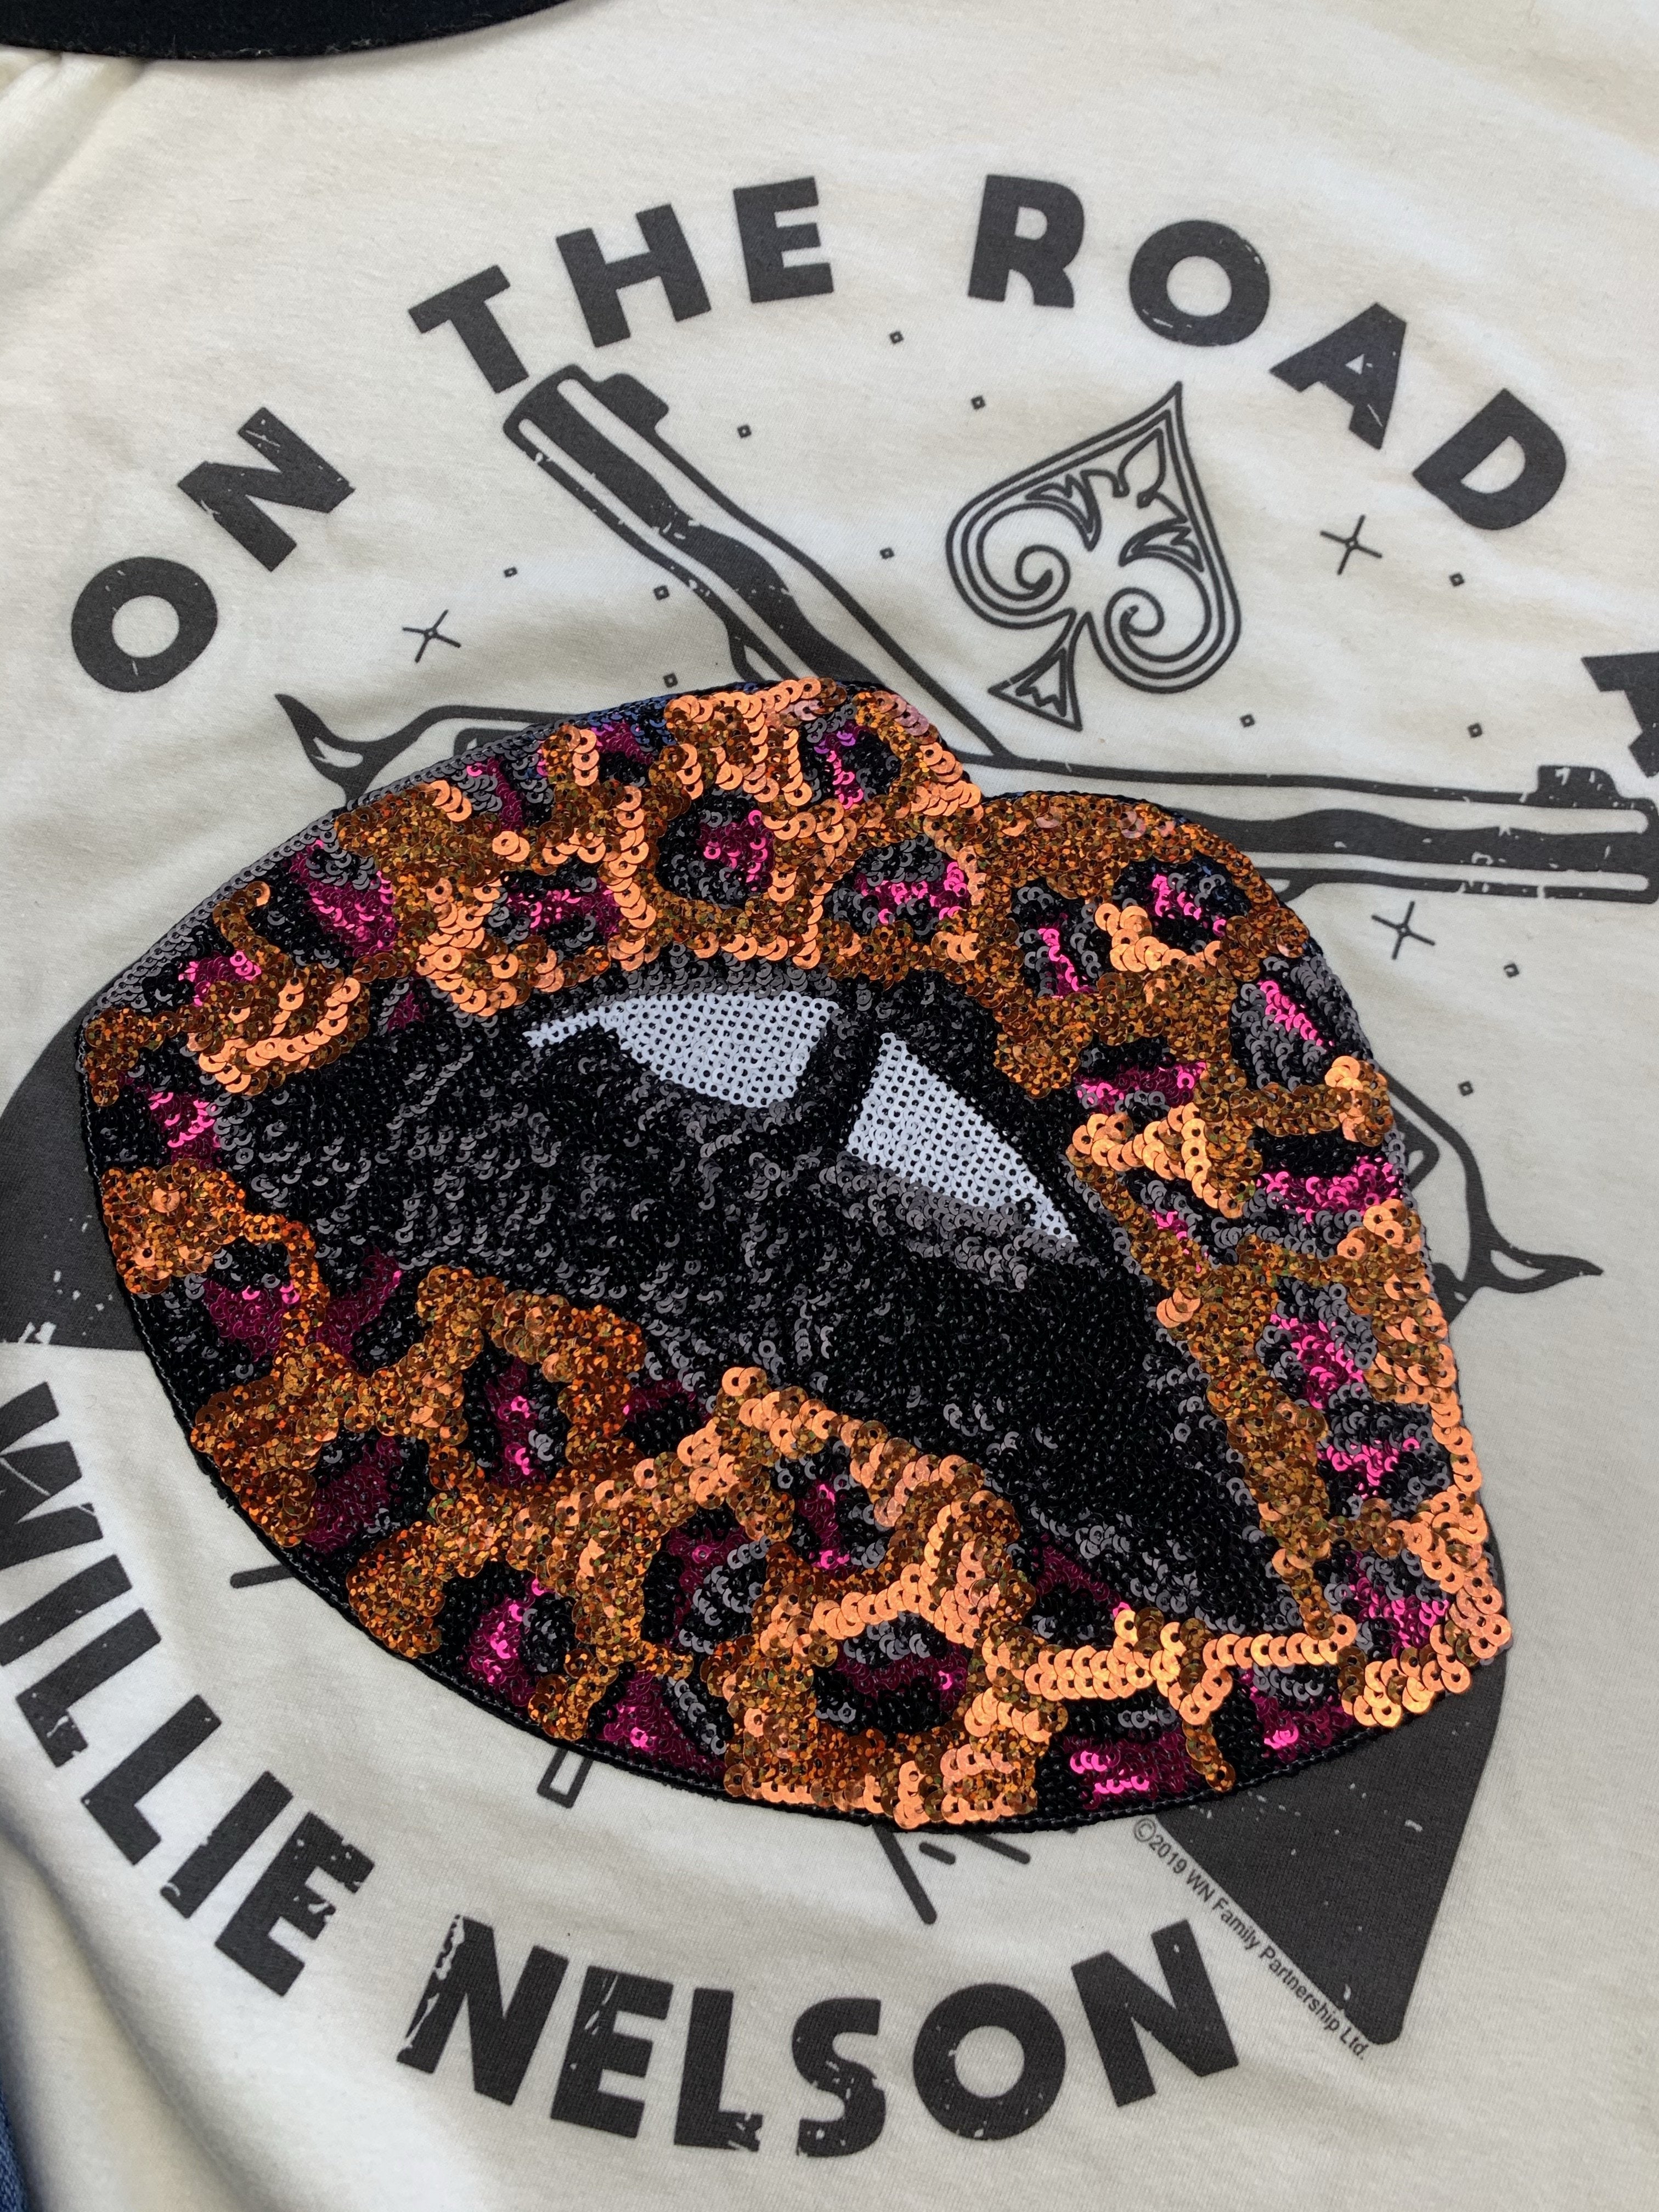 On The Road Again Tee